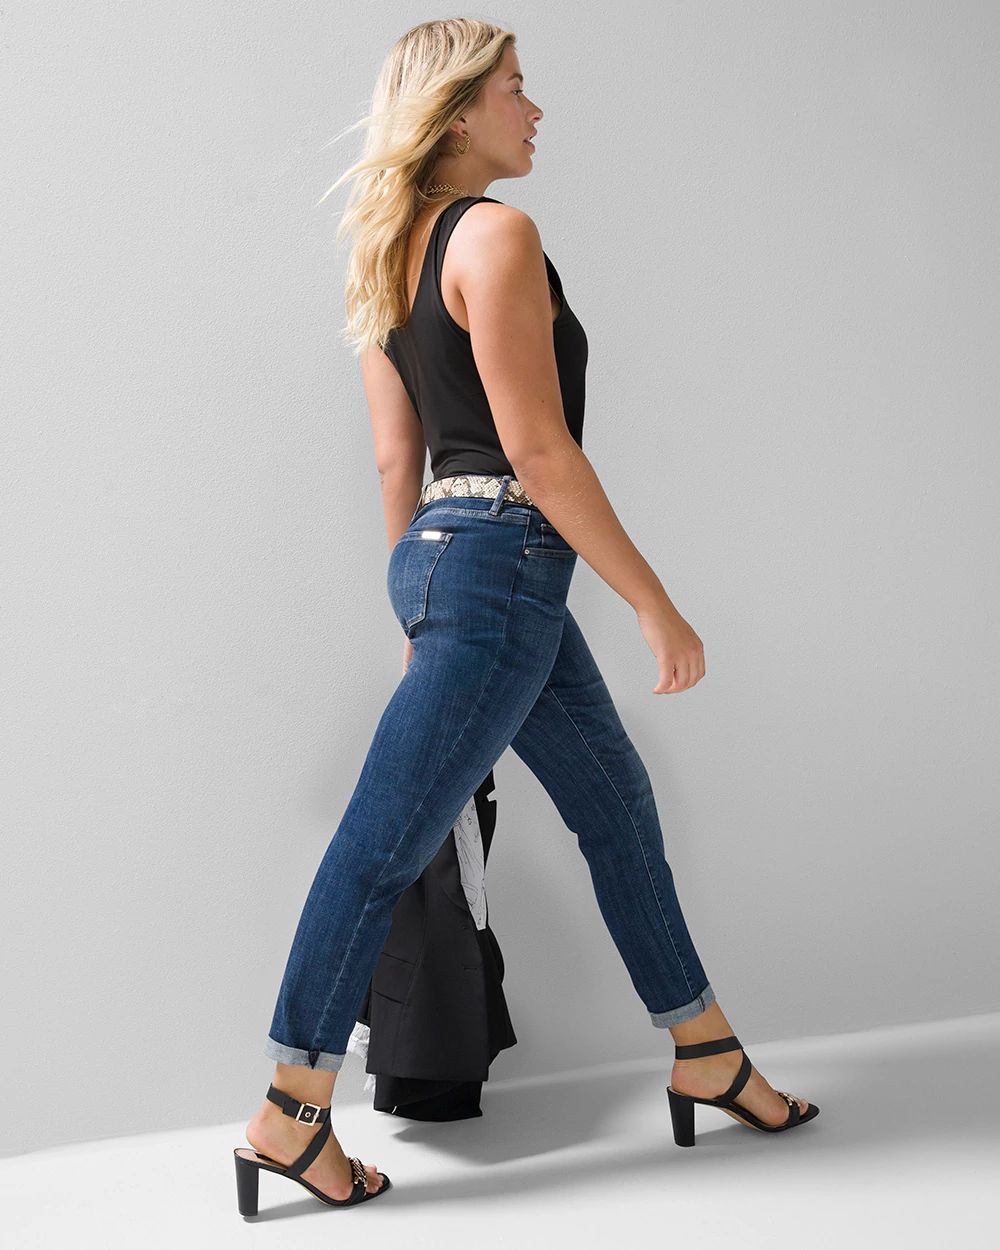 Curvy Mid-Rise Everyday Soft Denim™ Girlfriend Jeans click to view larger image.